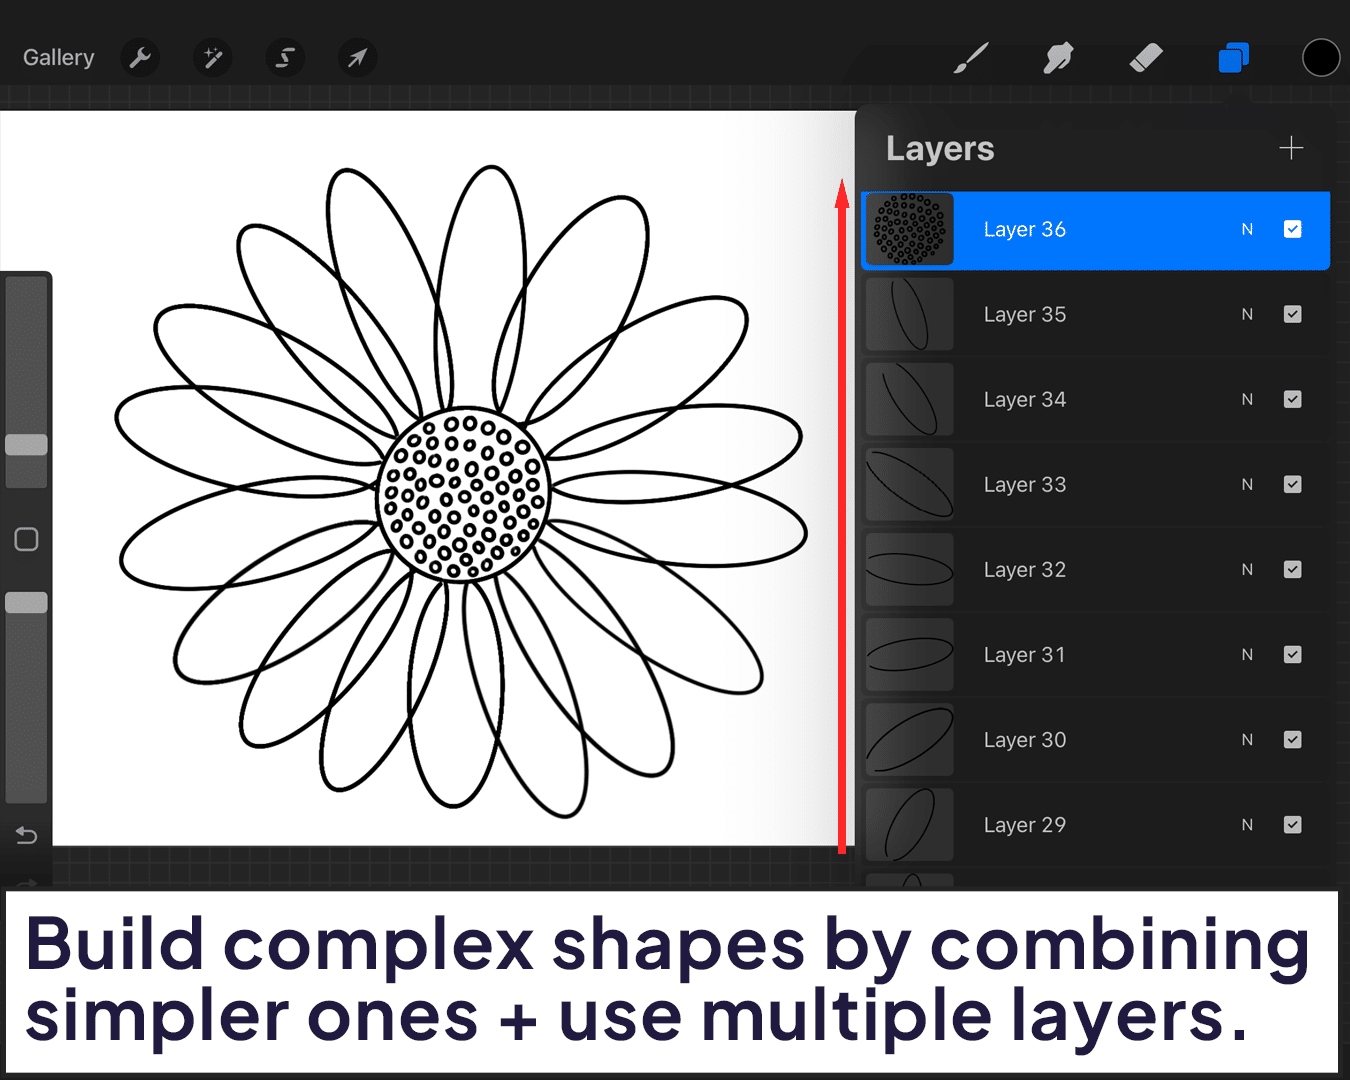 Combining simple shapes into complex ones